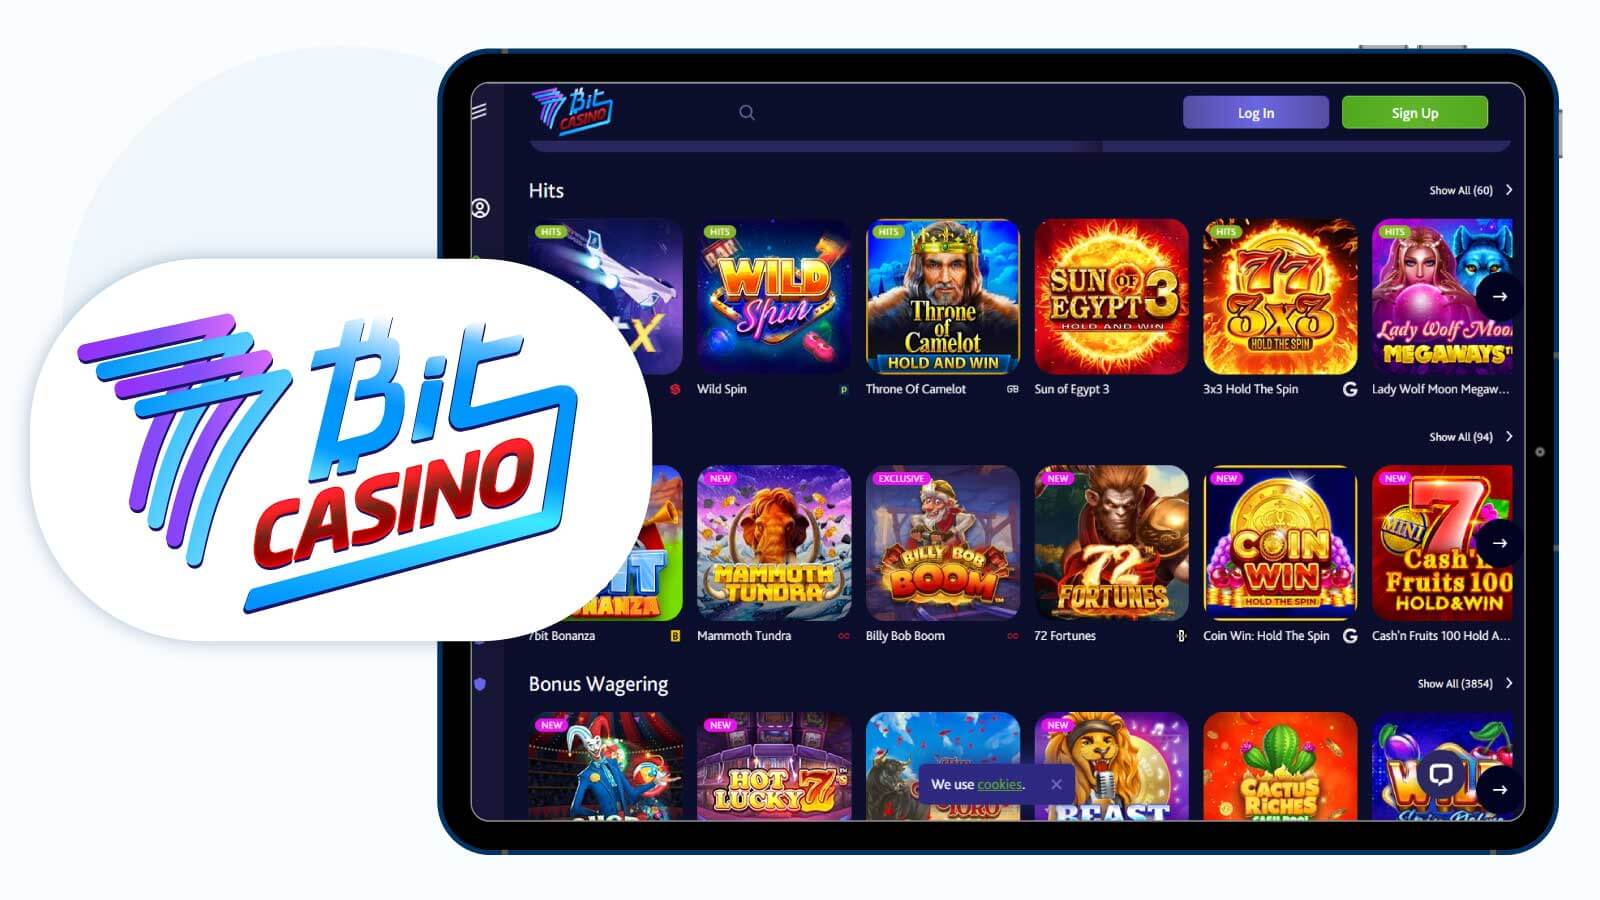 7Bit Casino Best Payout Casino for Live Games (96.8% RTP)